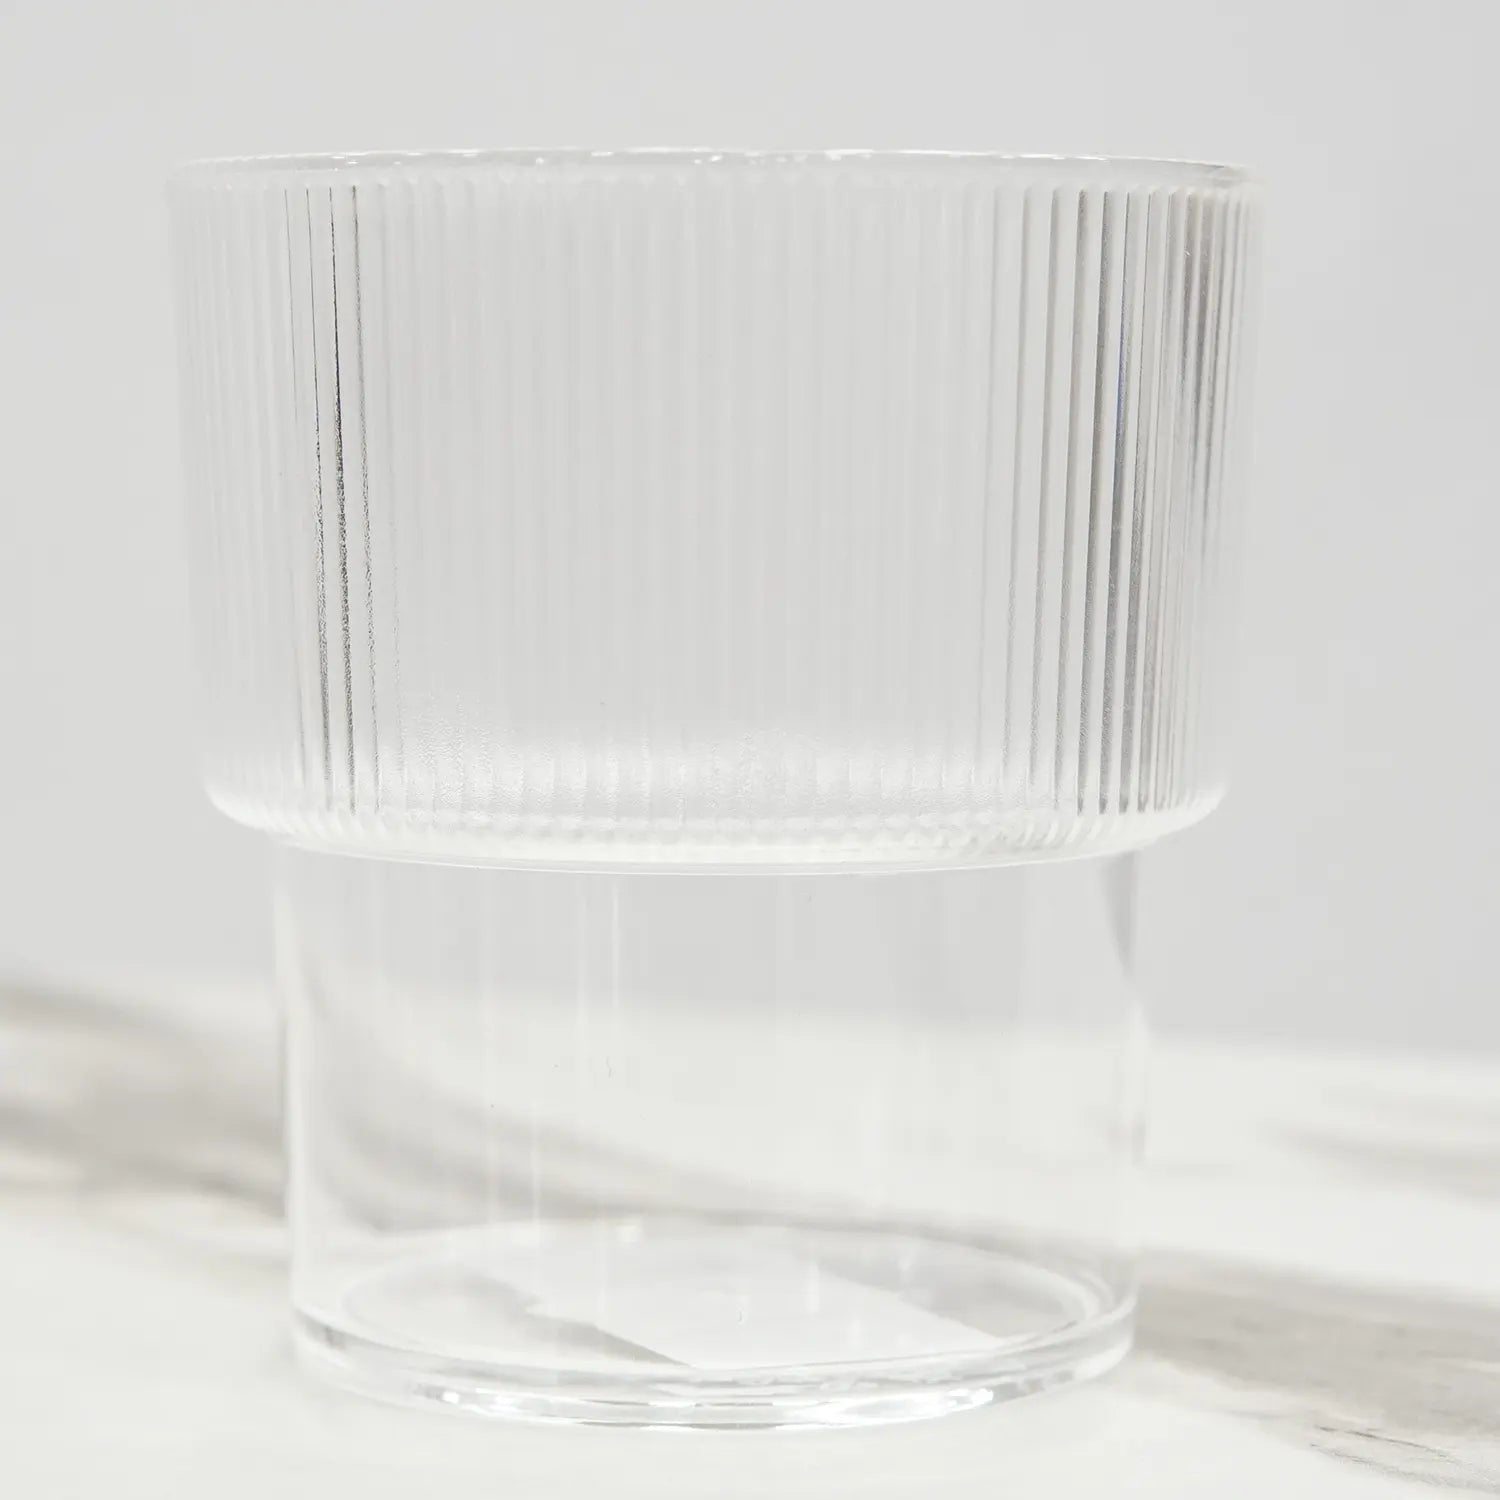 Purity in Sip: High-Quality Food-Grade, Health-Friendly Plastic Water Glass